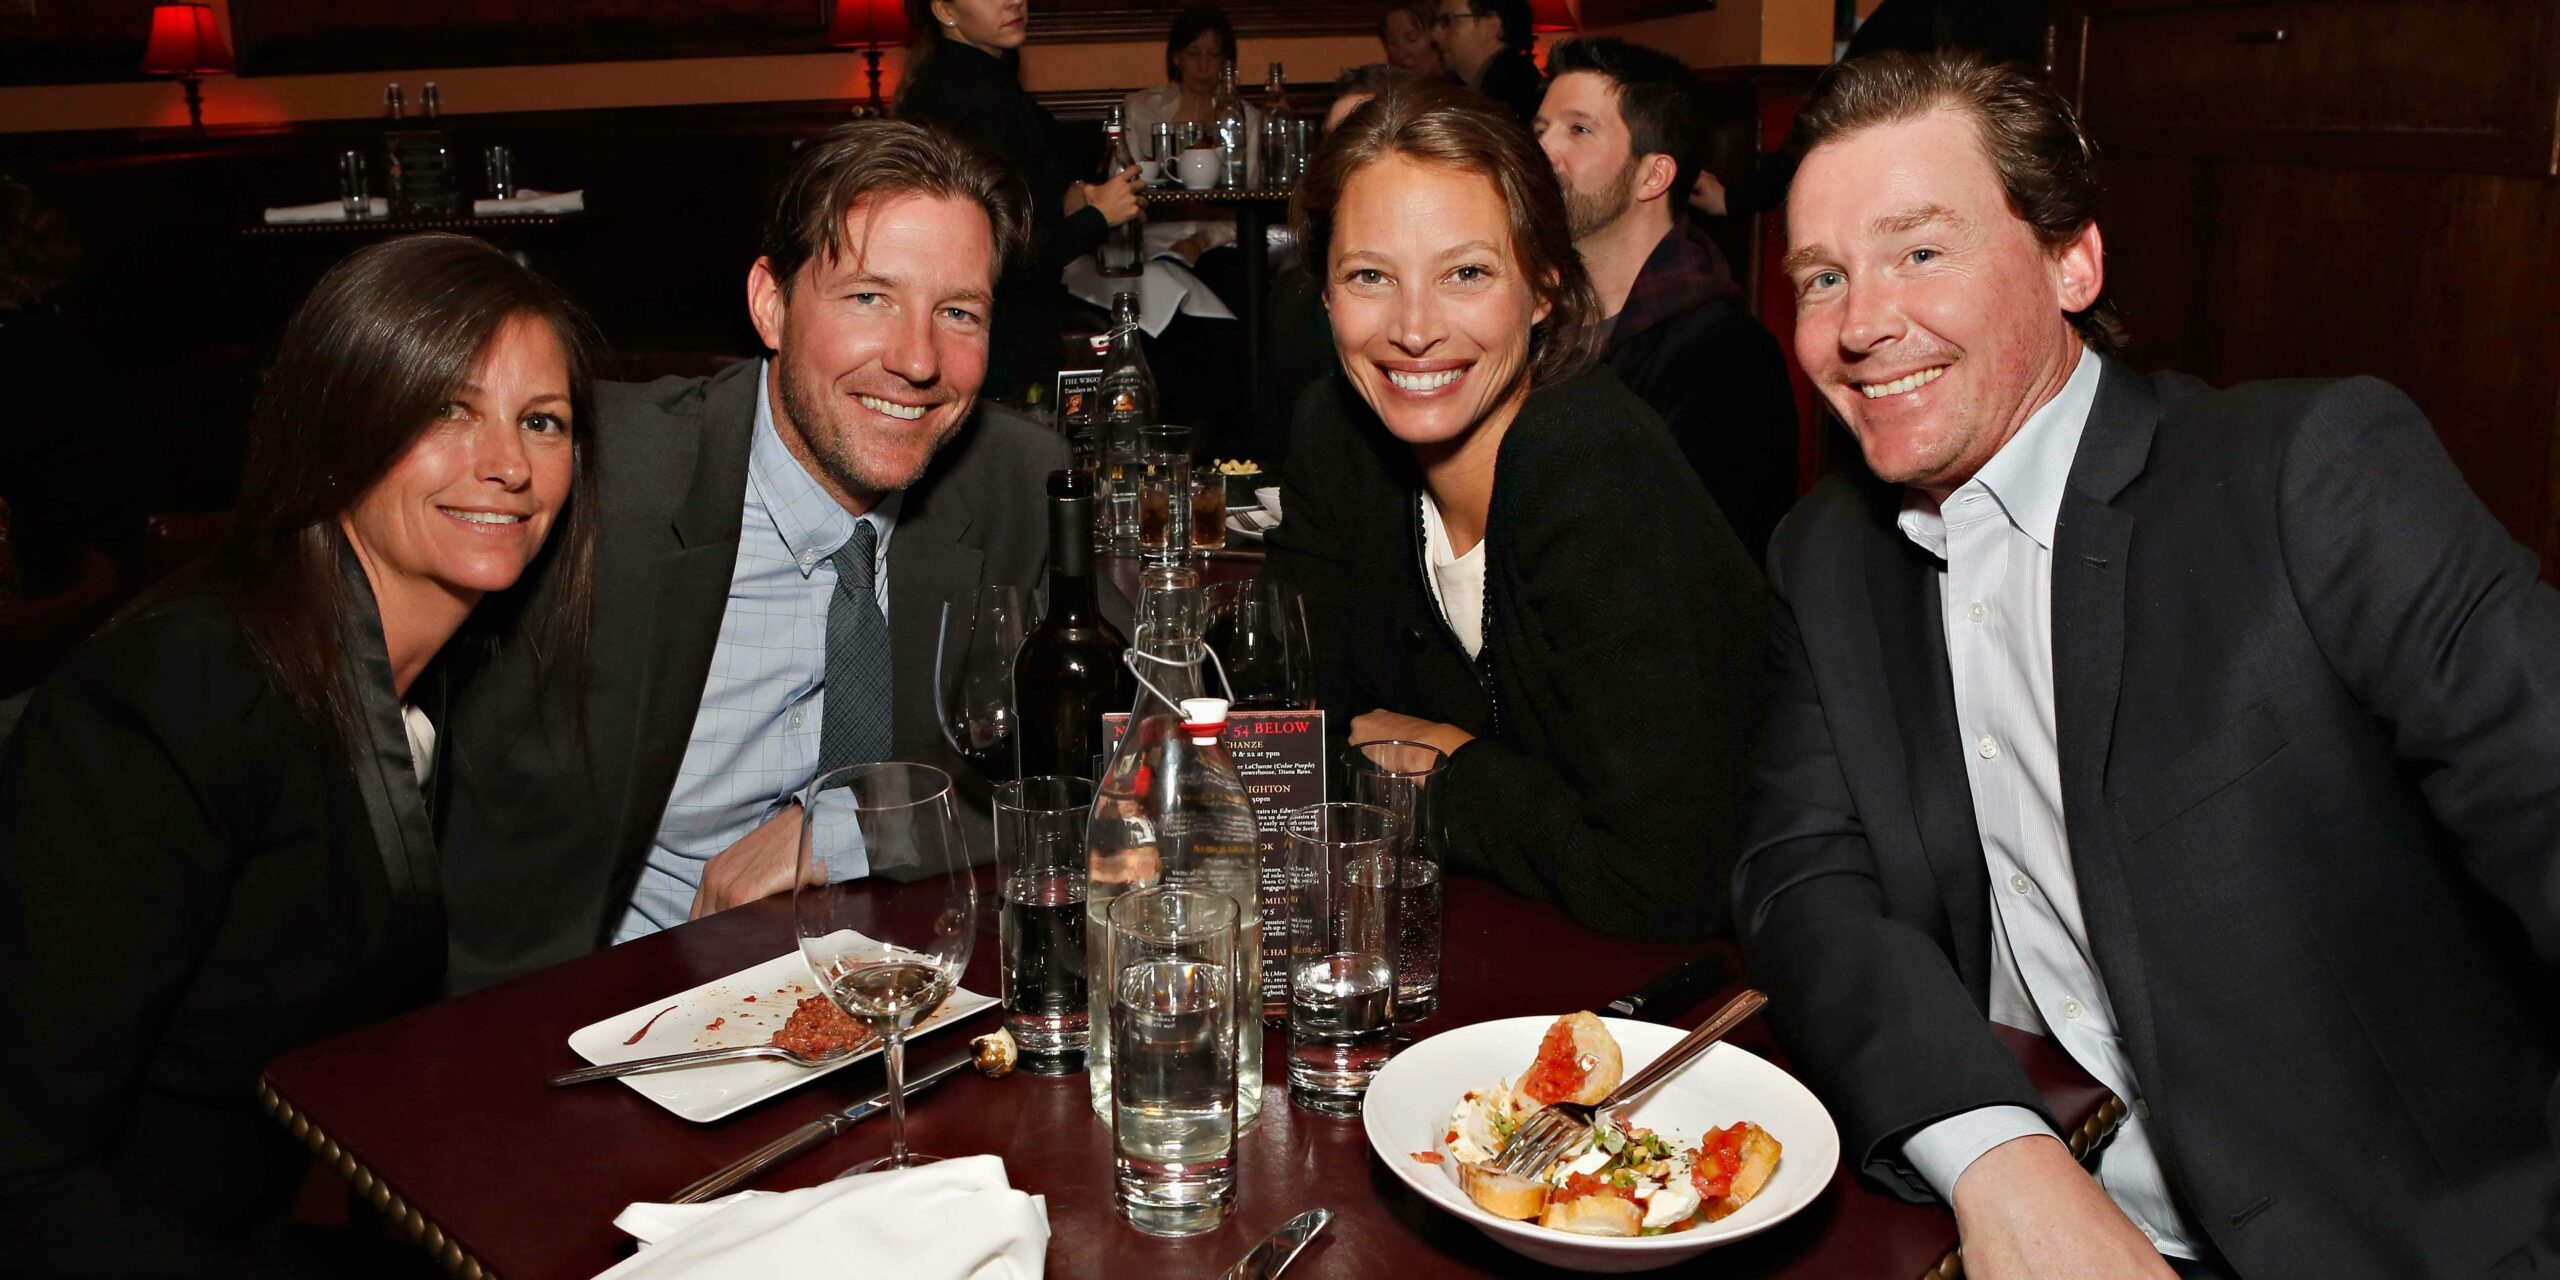 Are Christy Turlington and her sister married to brothers?